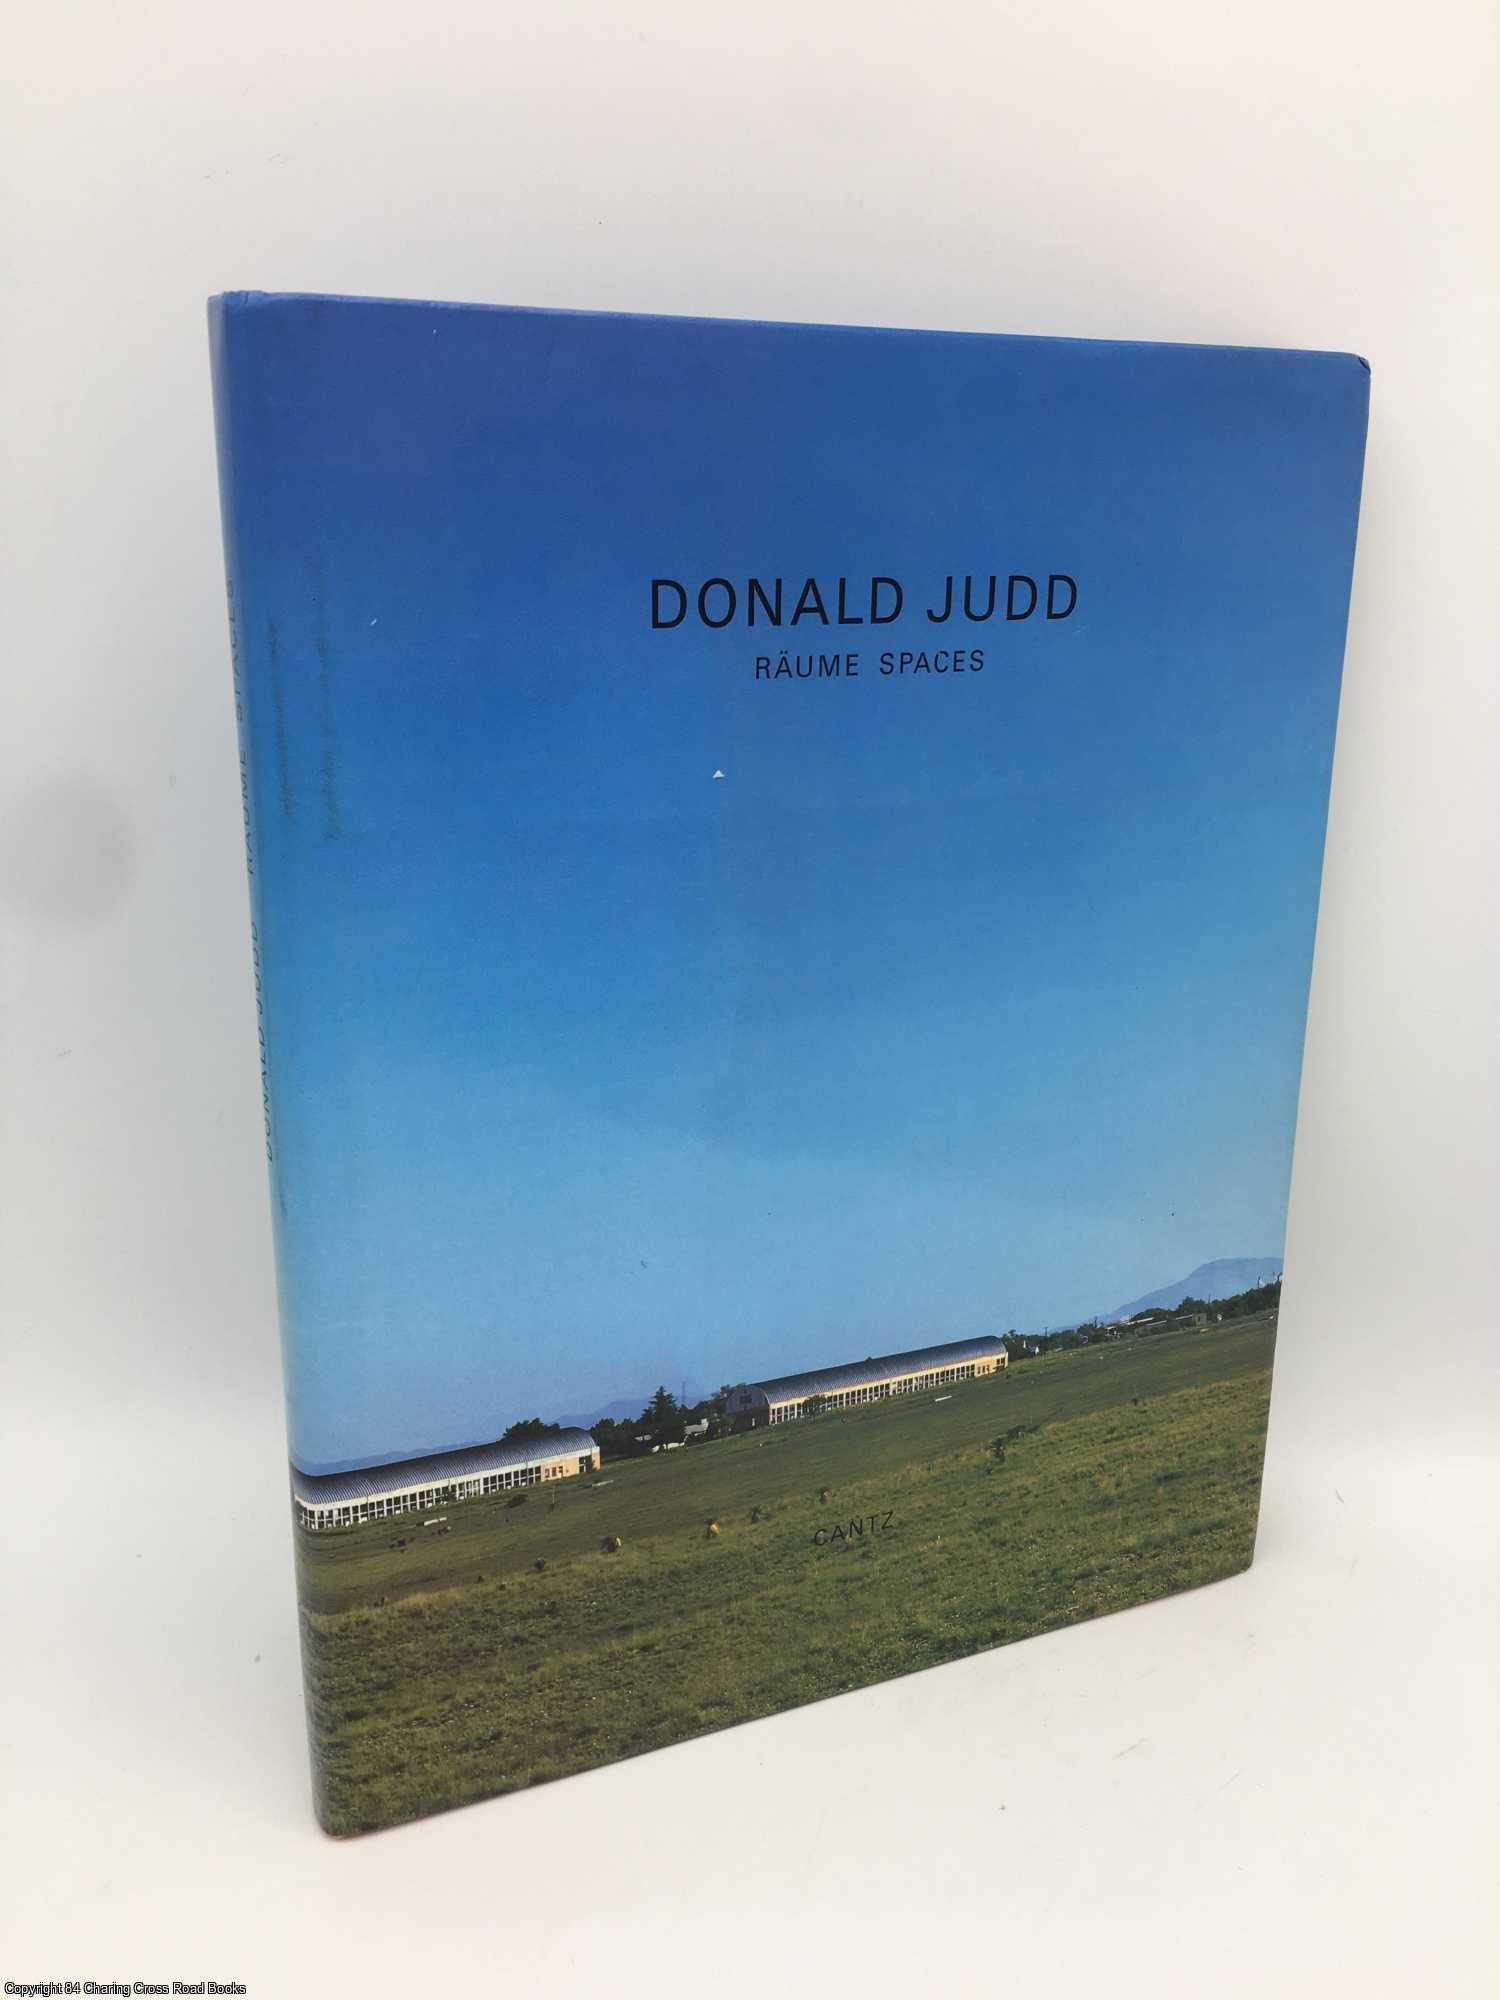 Donald Judd: Raume Spaces | Donald Judd | First Edition